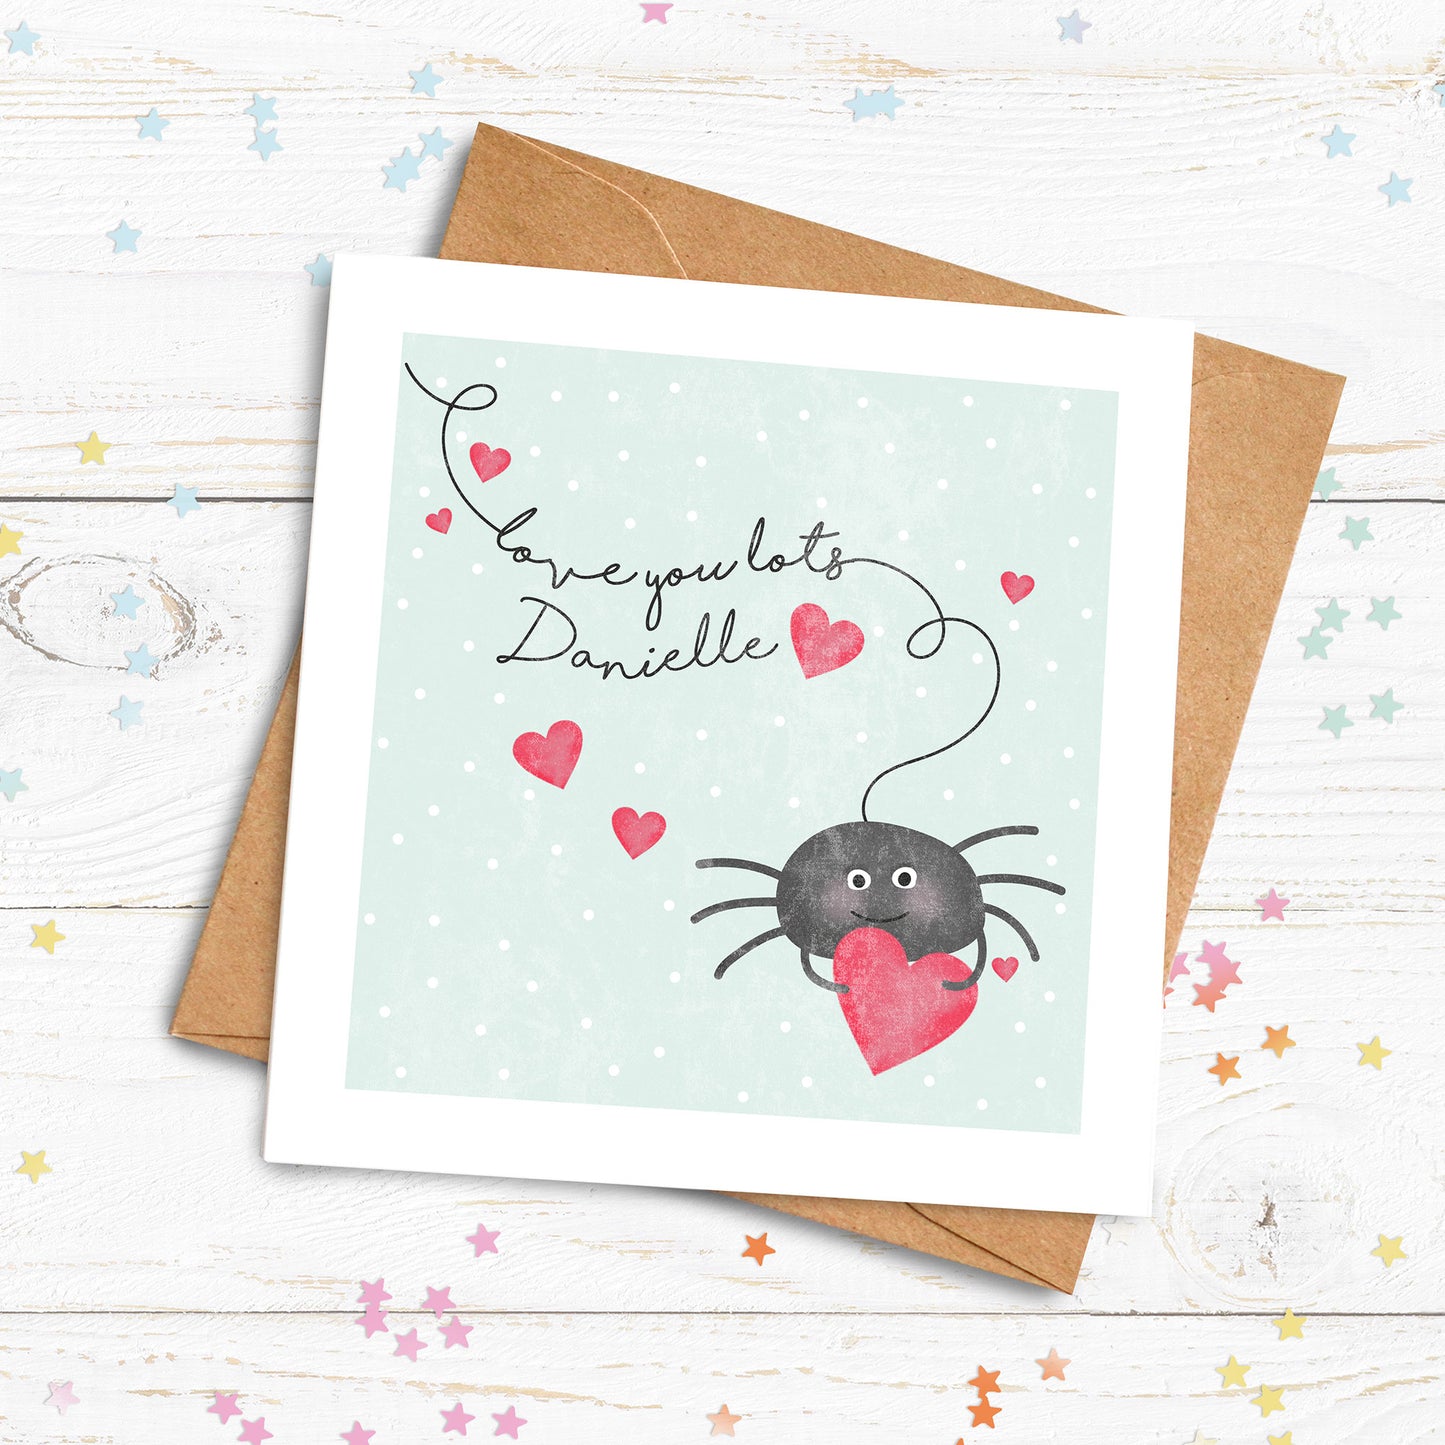 Love You Lots Spider Personalised Card. Cute Valentine's Card. Cute spider card. I Love You Card. Send Direct Option.